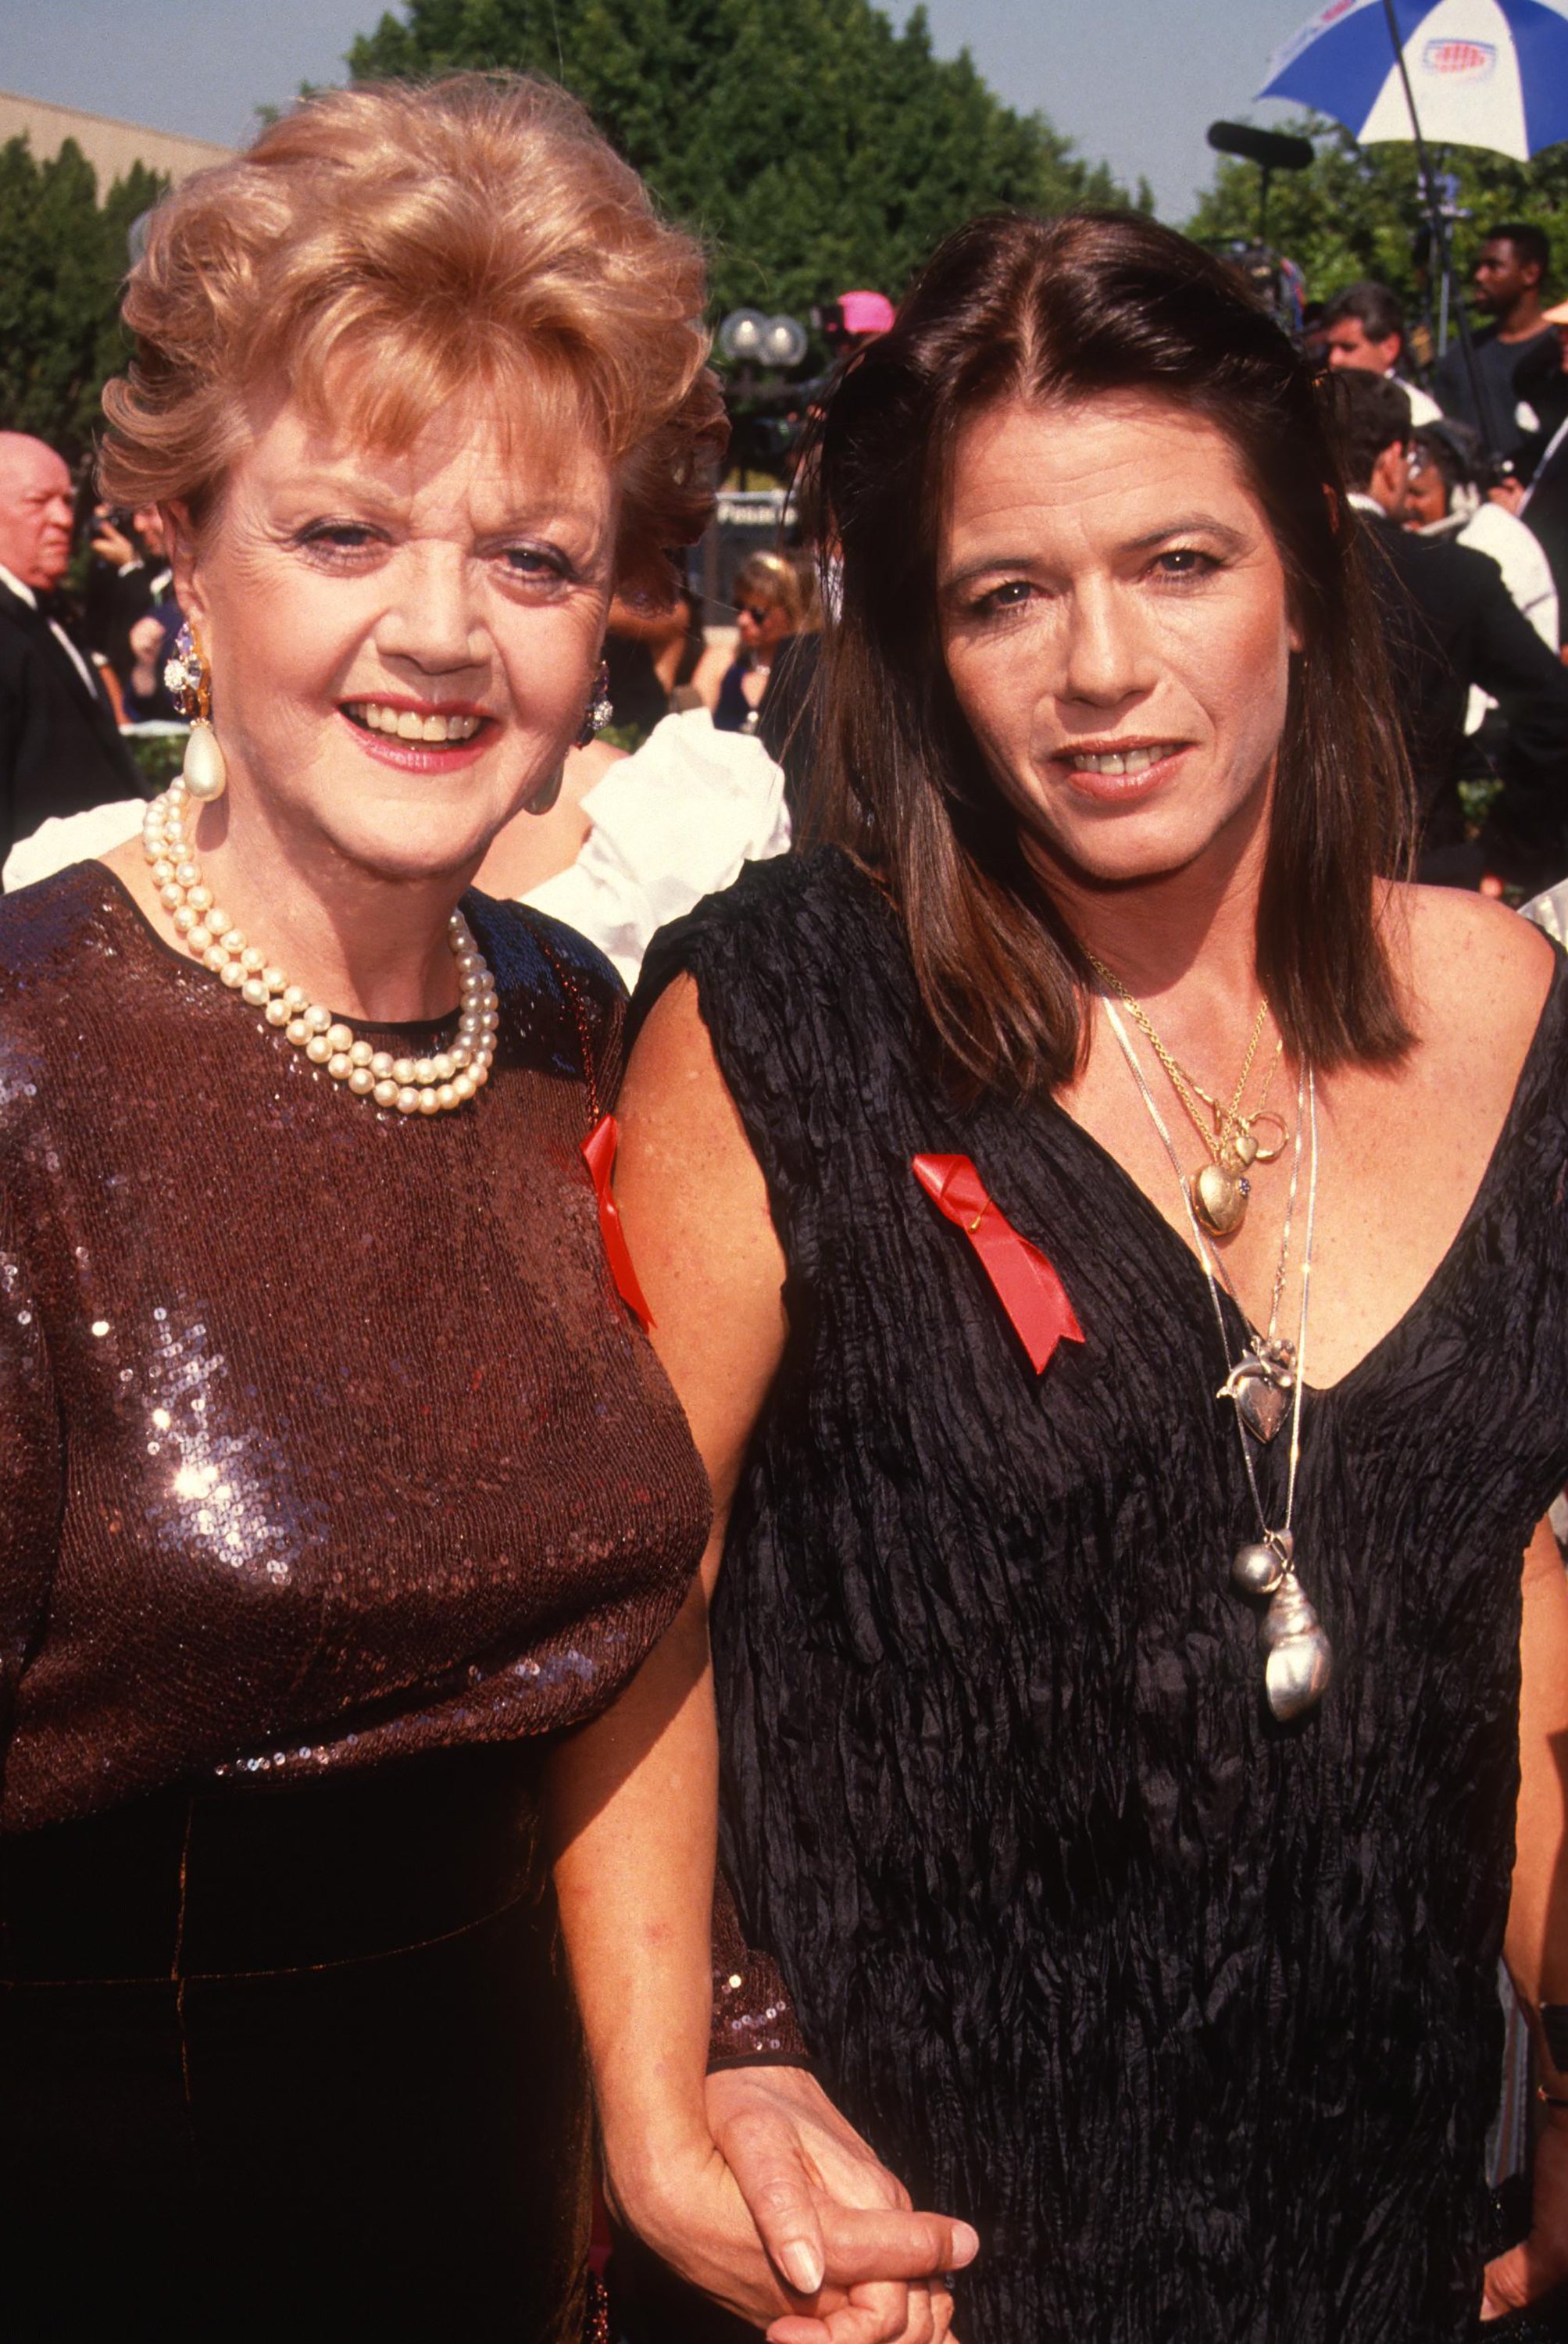 Angela Lansbury and daughter Deirdre Angela Shaw attend 43rd Annual Primetime Emmy Awards at the Pasadena Civic Auditorium in Pasadena, California on August 25, 1991. | Source: Getty Images